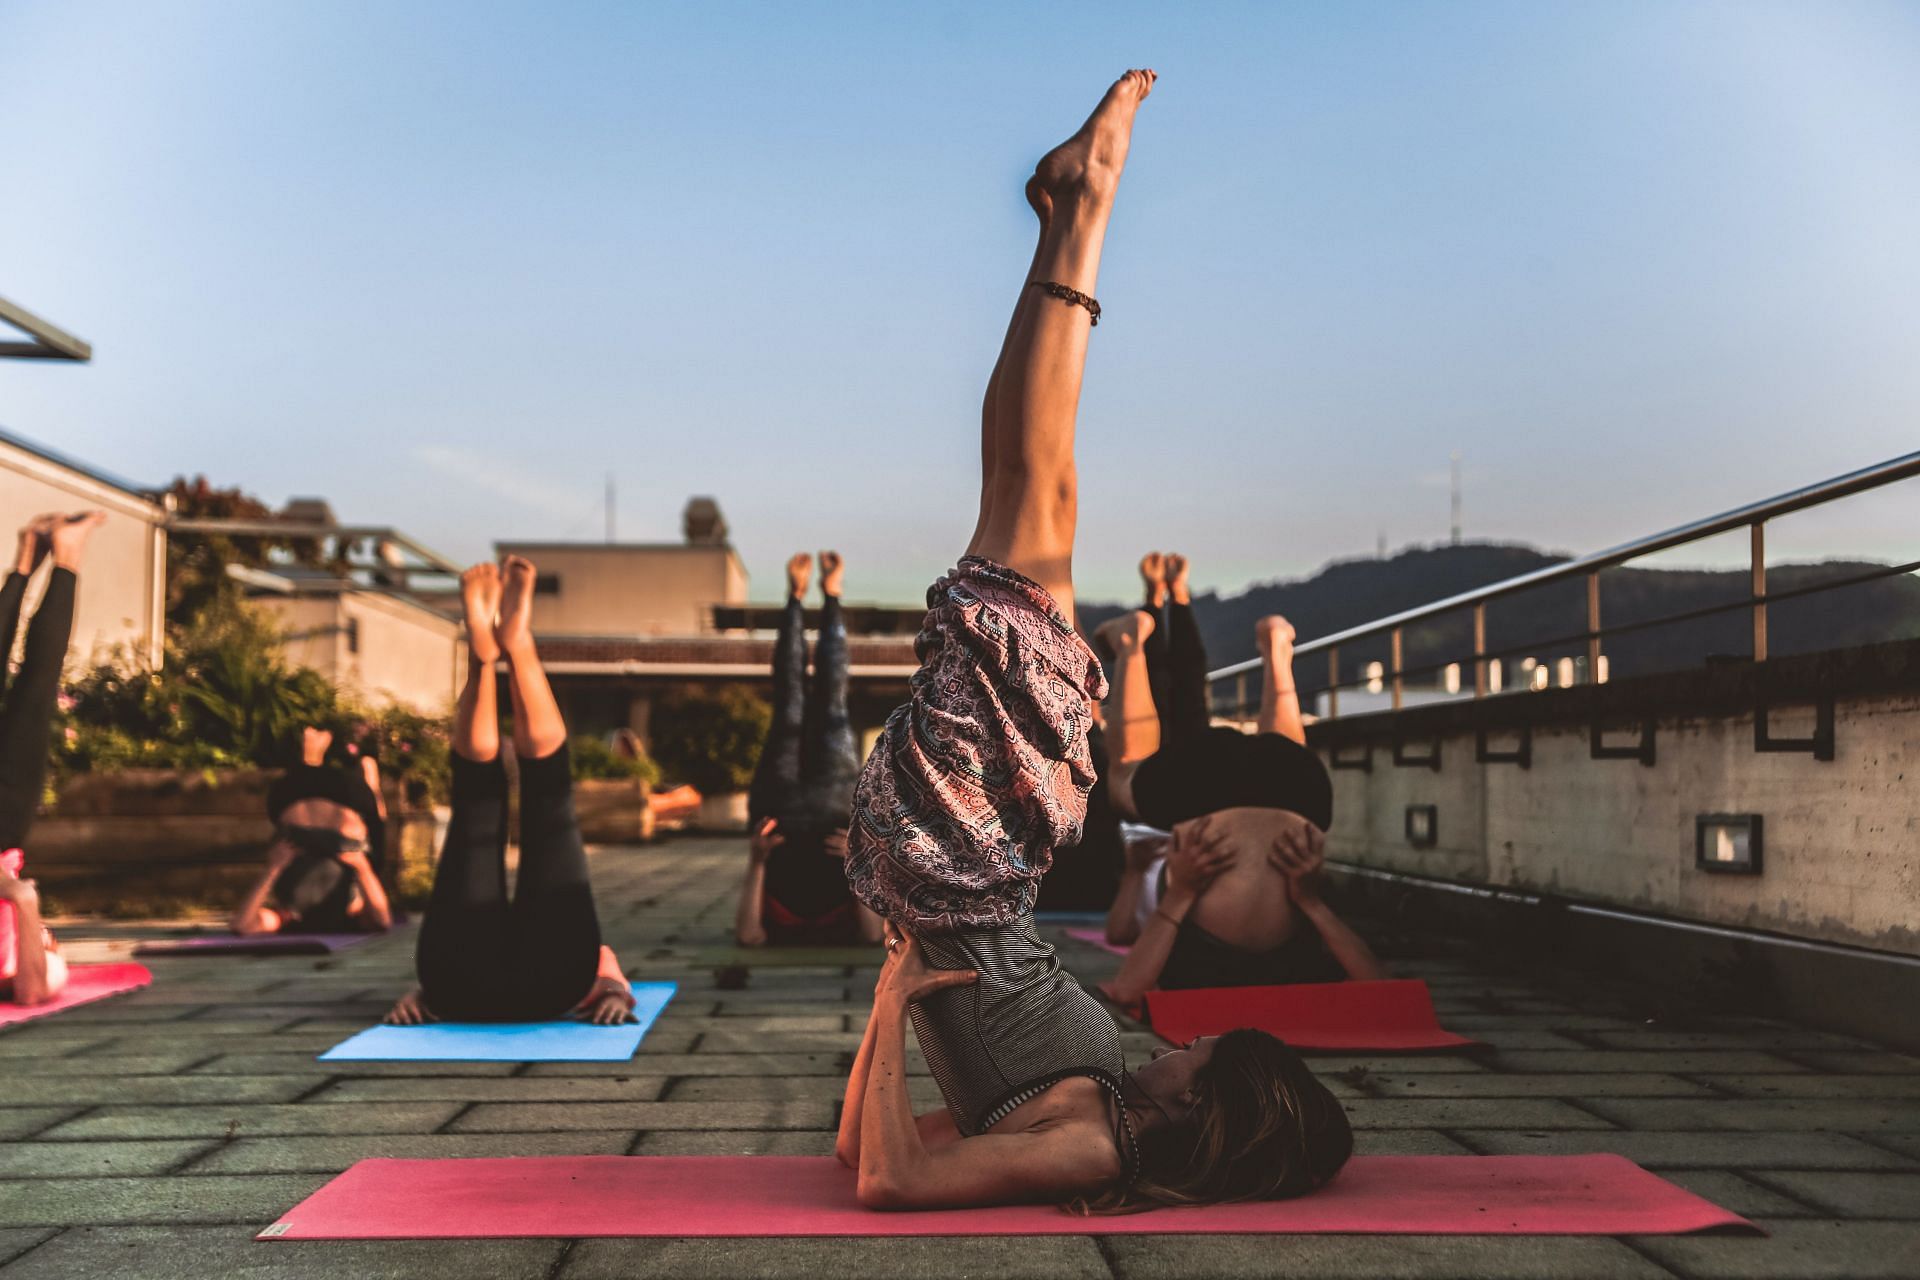 Yoga poses for anxiety help improve general health and well-being. (Image via Pexels/ Amin Sujan)